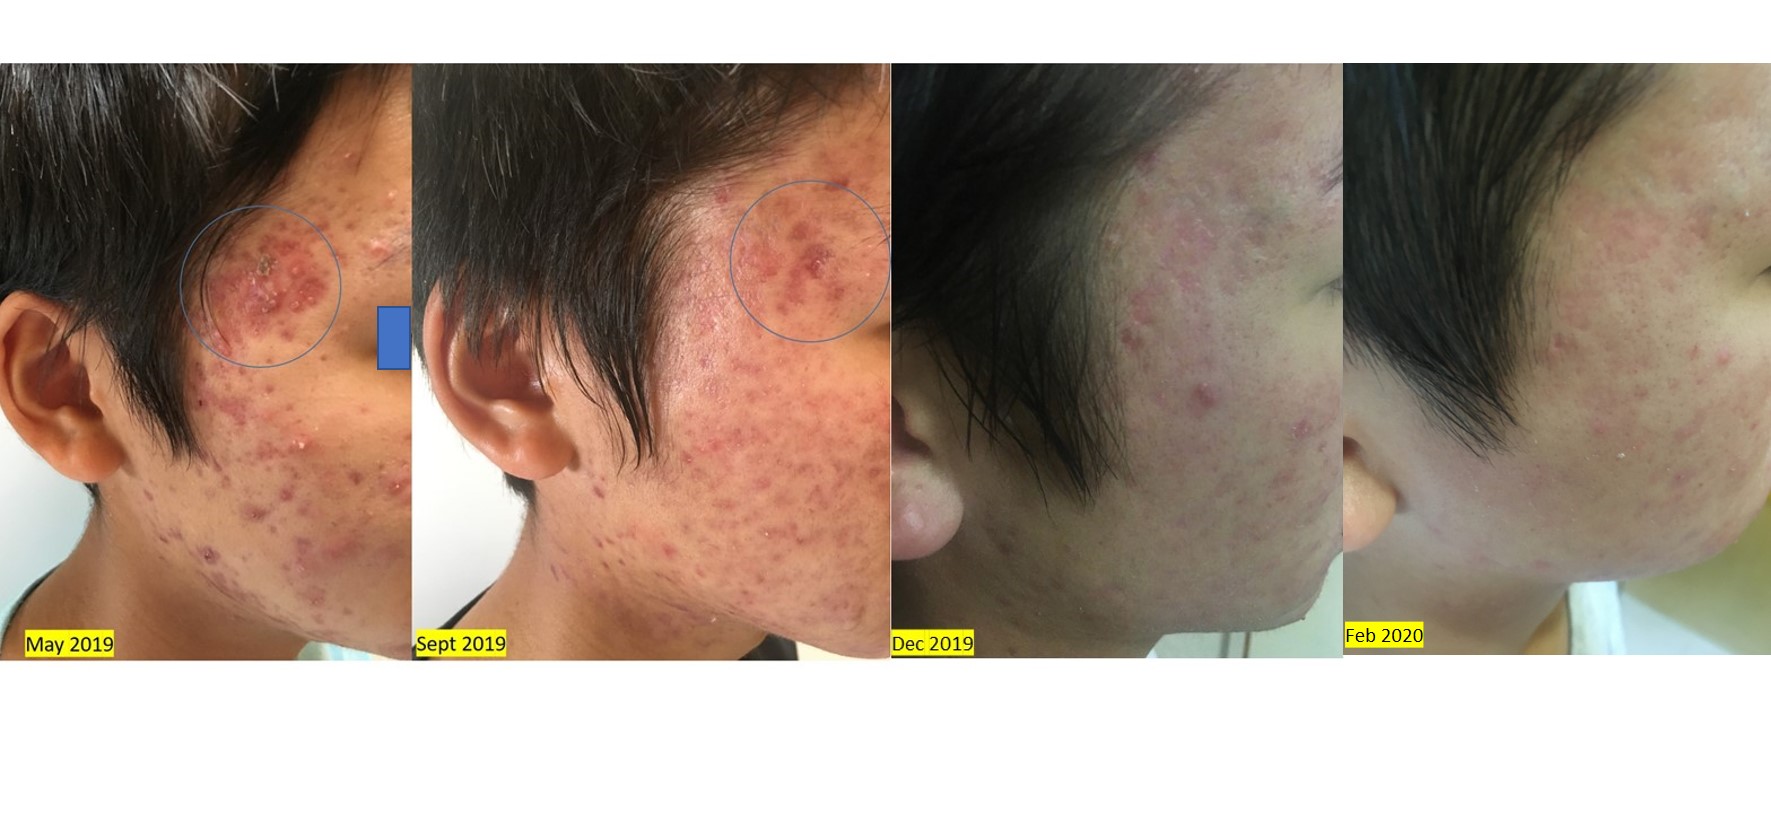 Severe childhood acne not responding to "standard" medical remedies, shows significant improvement after 9 months' wheatgrass extract treatment.